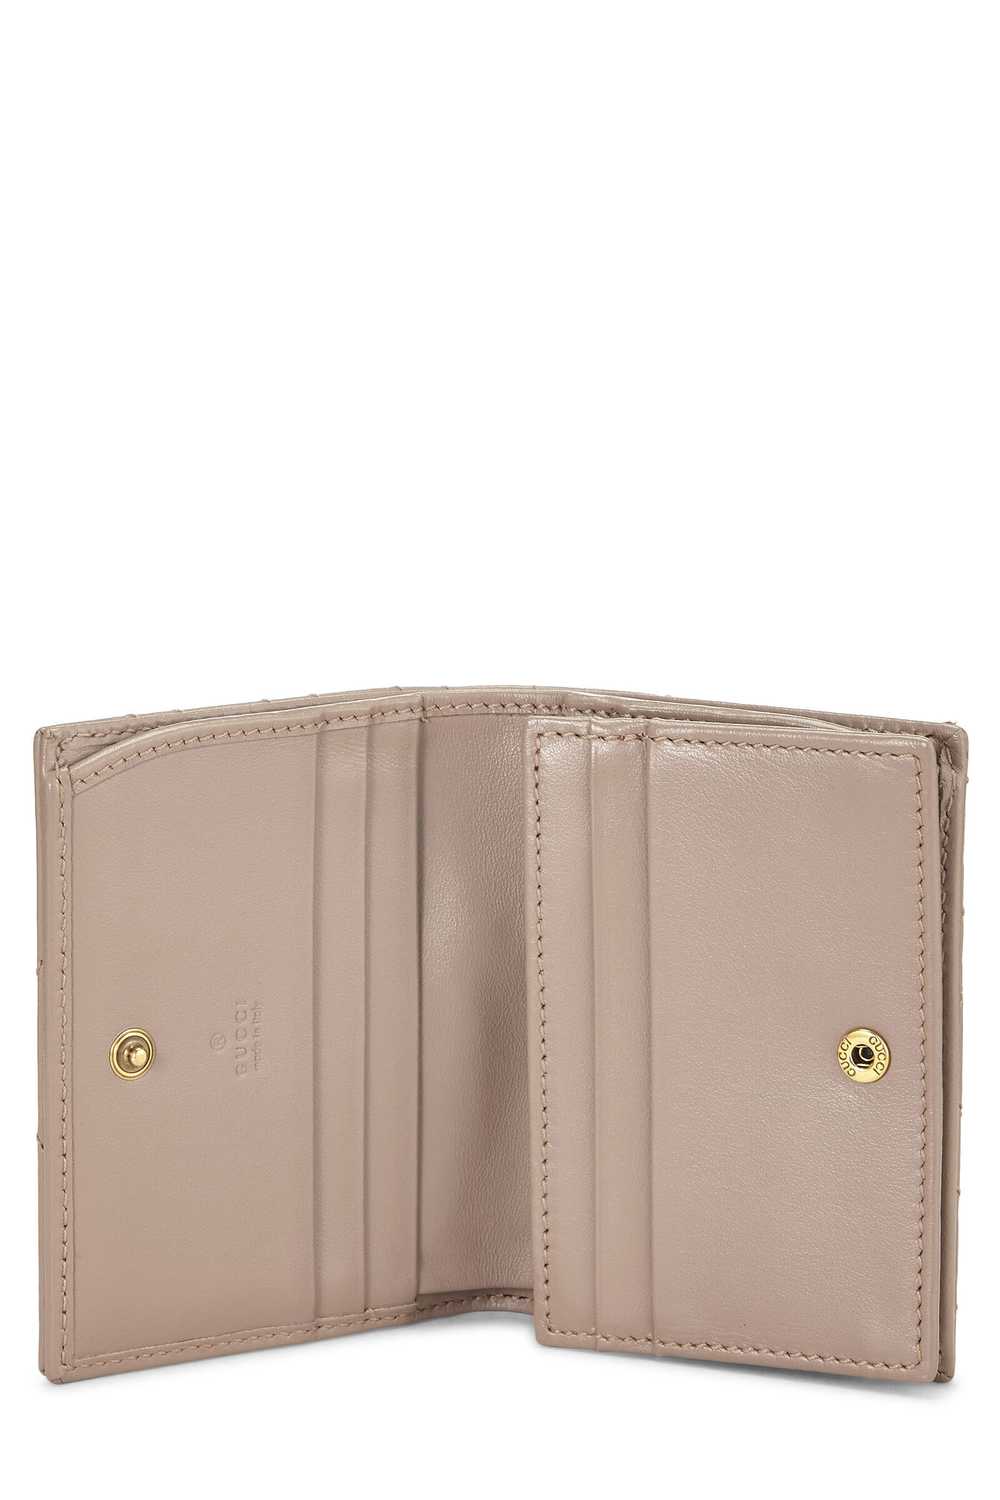 Pink Leather GG Marmont Compact Wallet - image 4